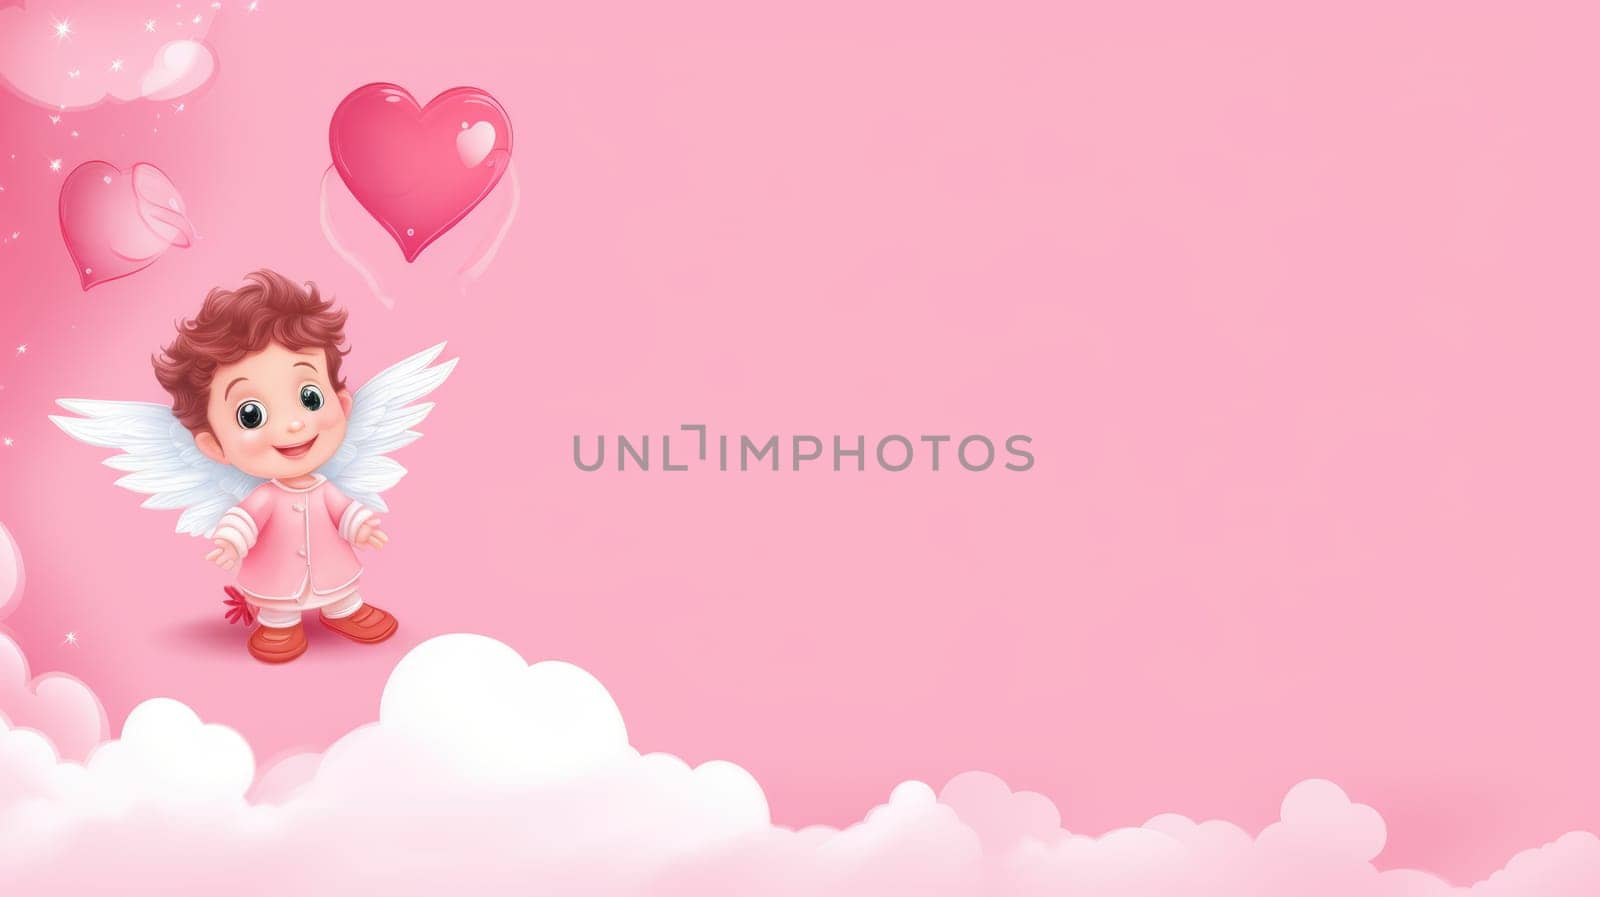 Happy Valentine's Day banner. Cupid in cartoon style on pink background by natali_brill